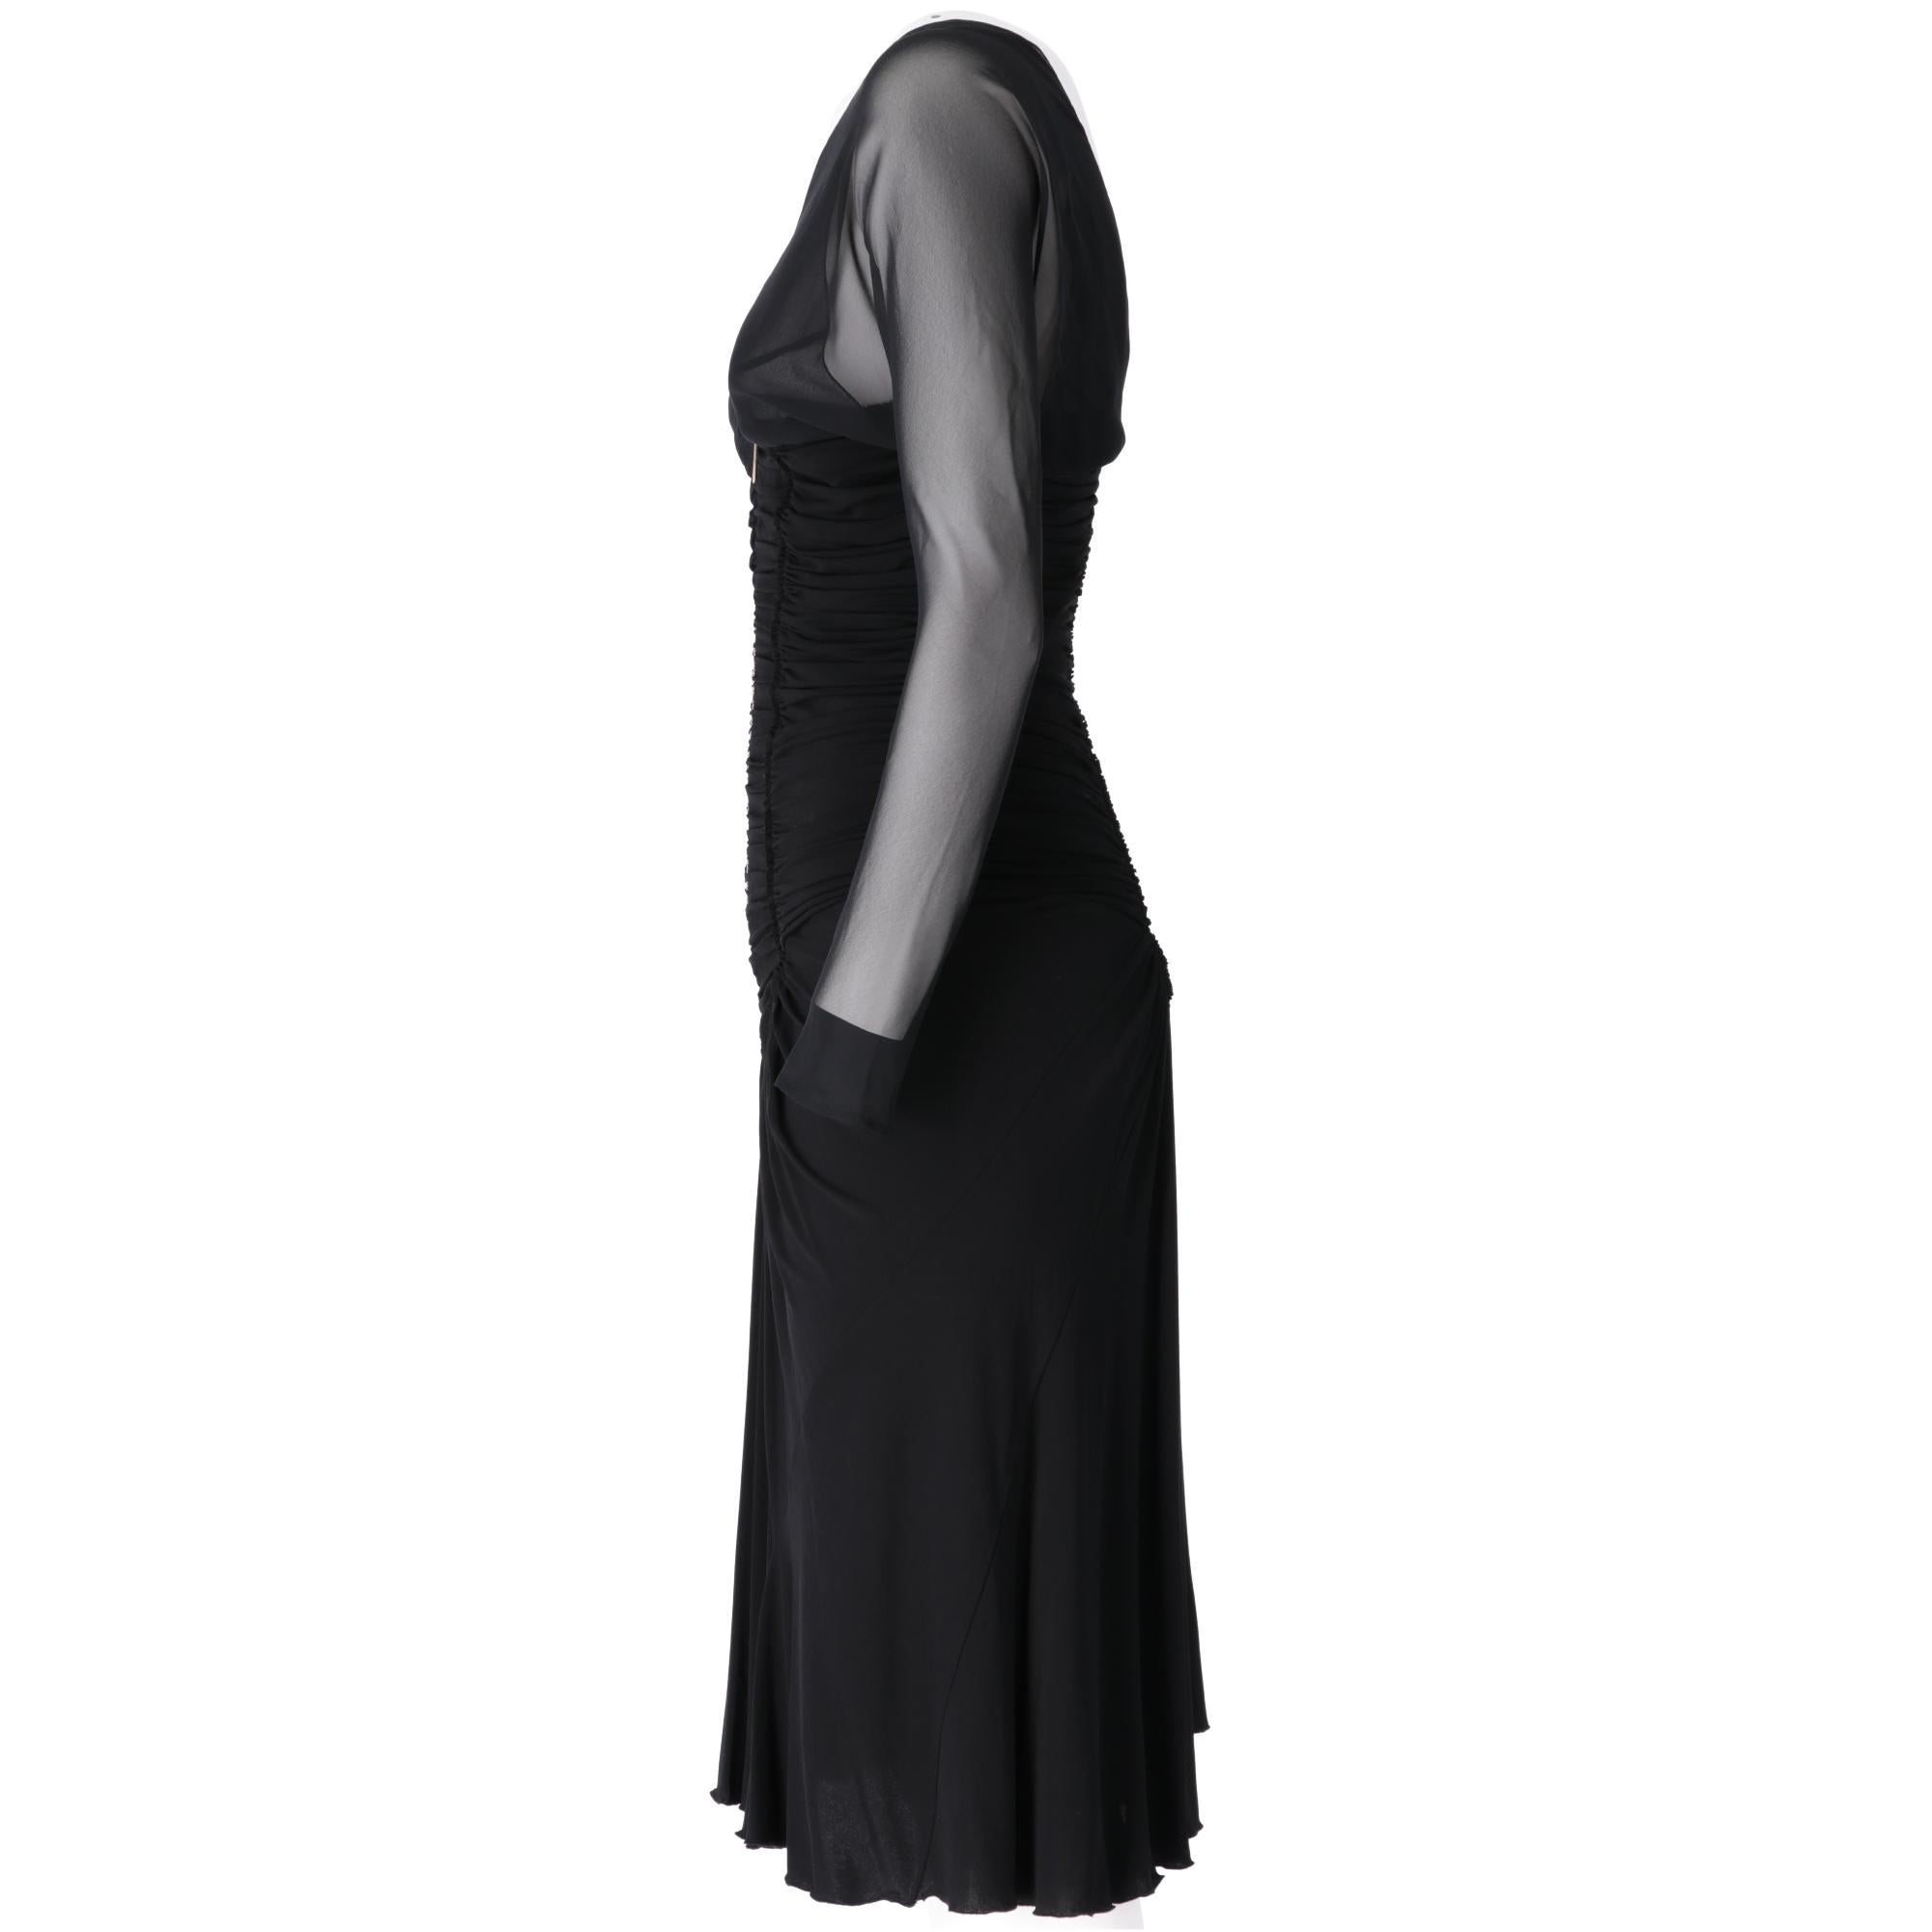 Roberto Cavalli V-neck black dress, long semi-transparent sleeves with semi-opaque inner lining, empire cut with decorative curls at abdomen height and wide skirt below the knee, zip closure on the back.

The item shows slight signs of wear on the